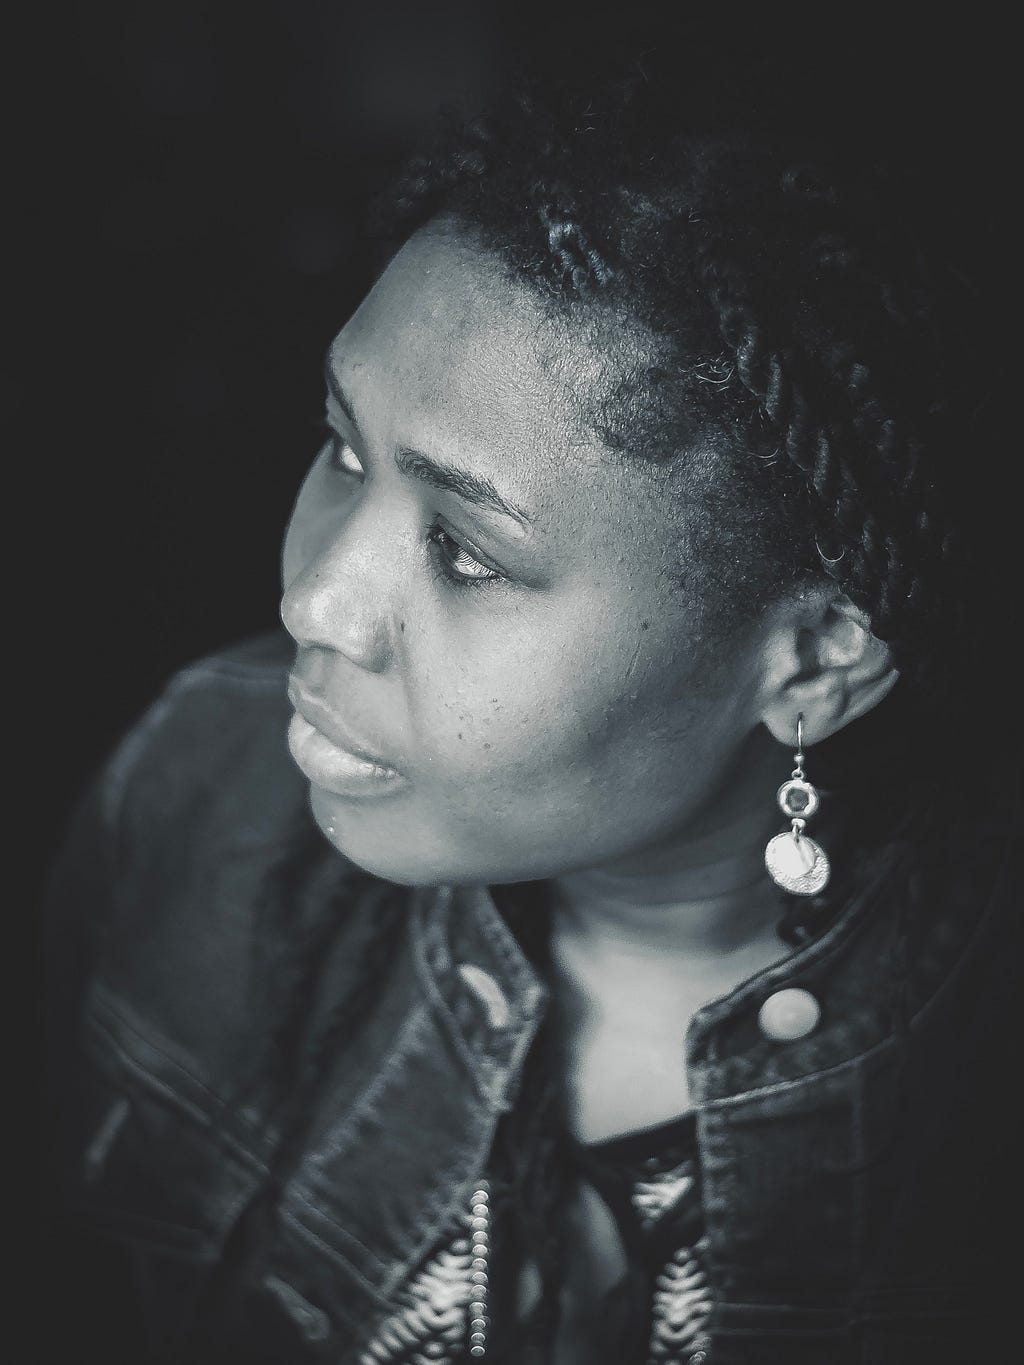 A side profile of an African woman wearing earrings and staring off into the distance in a dignified way.